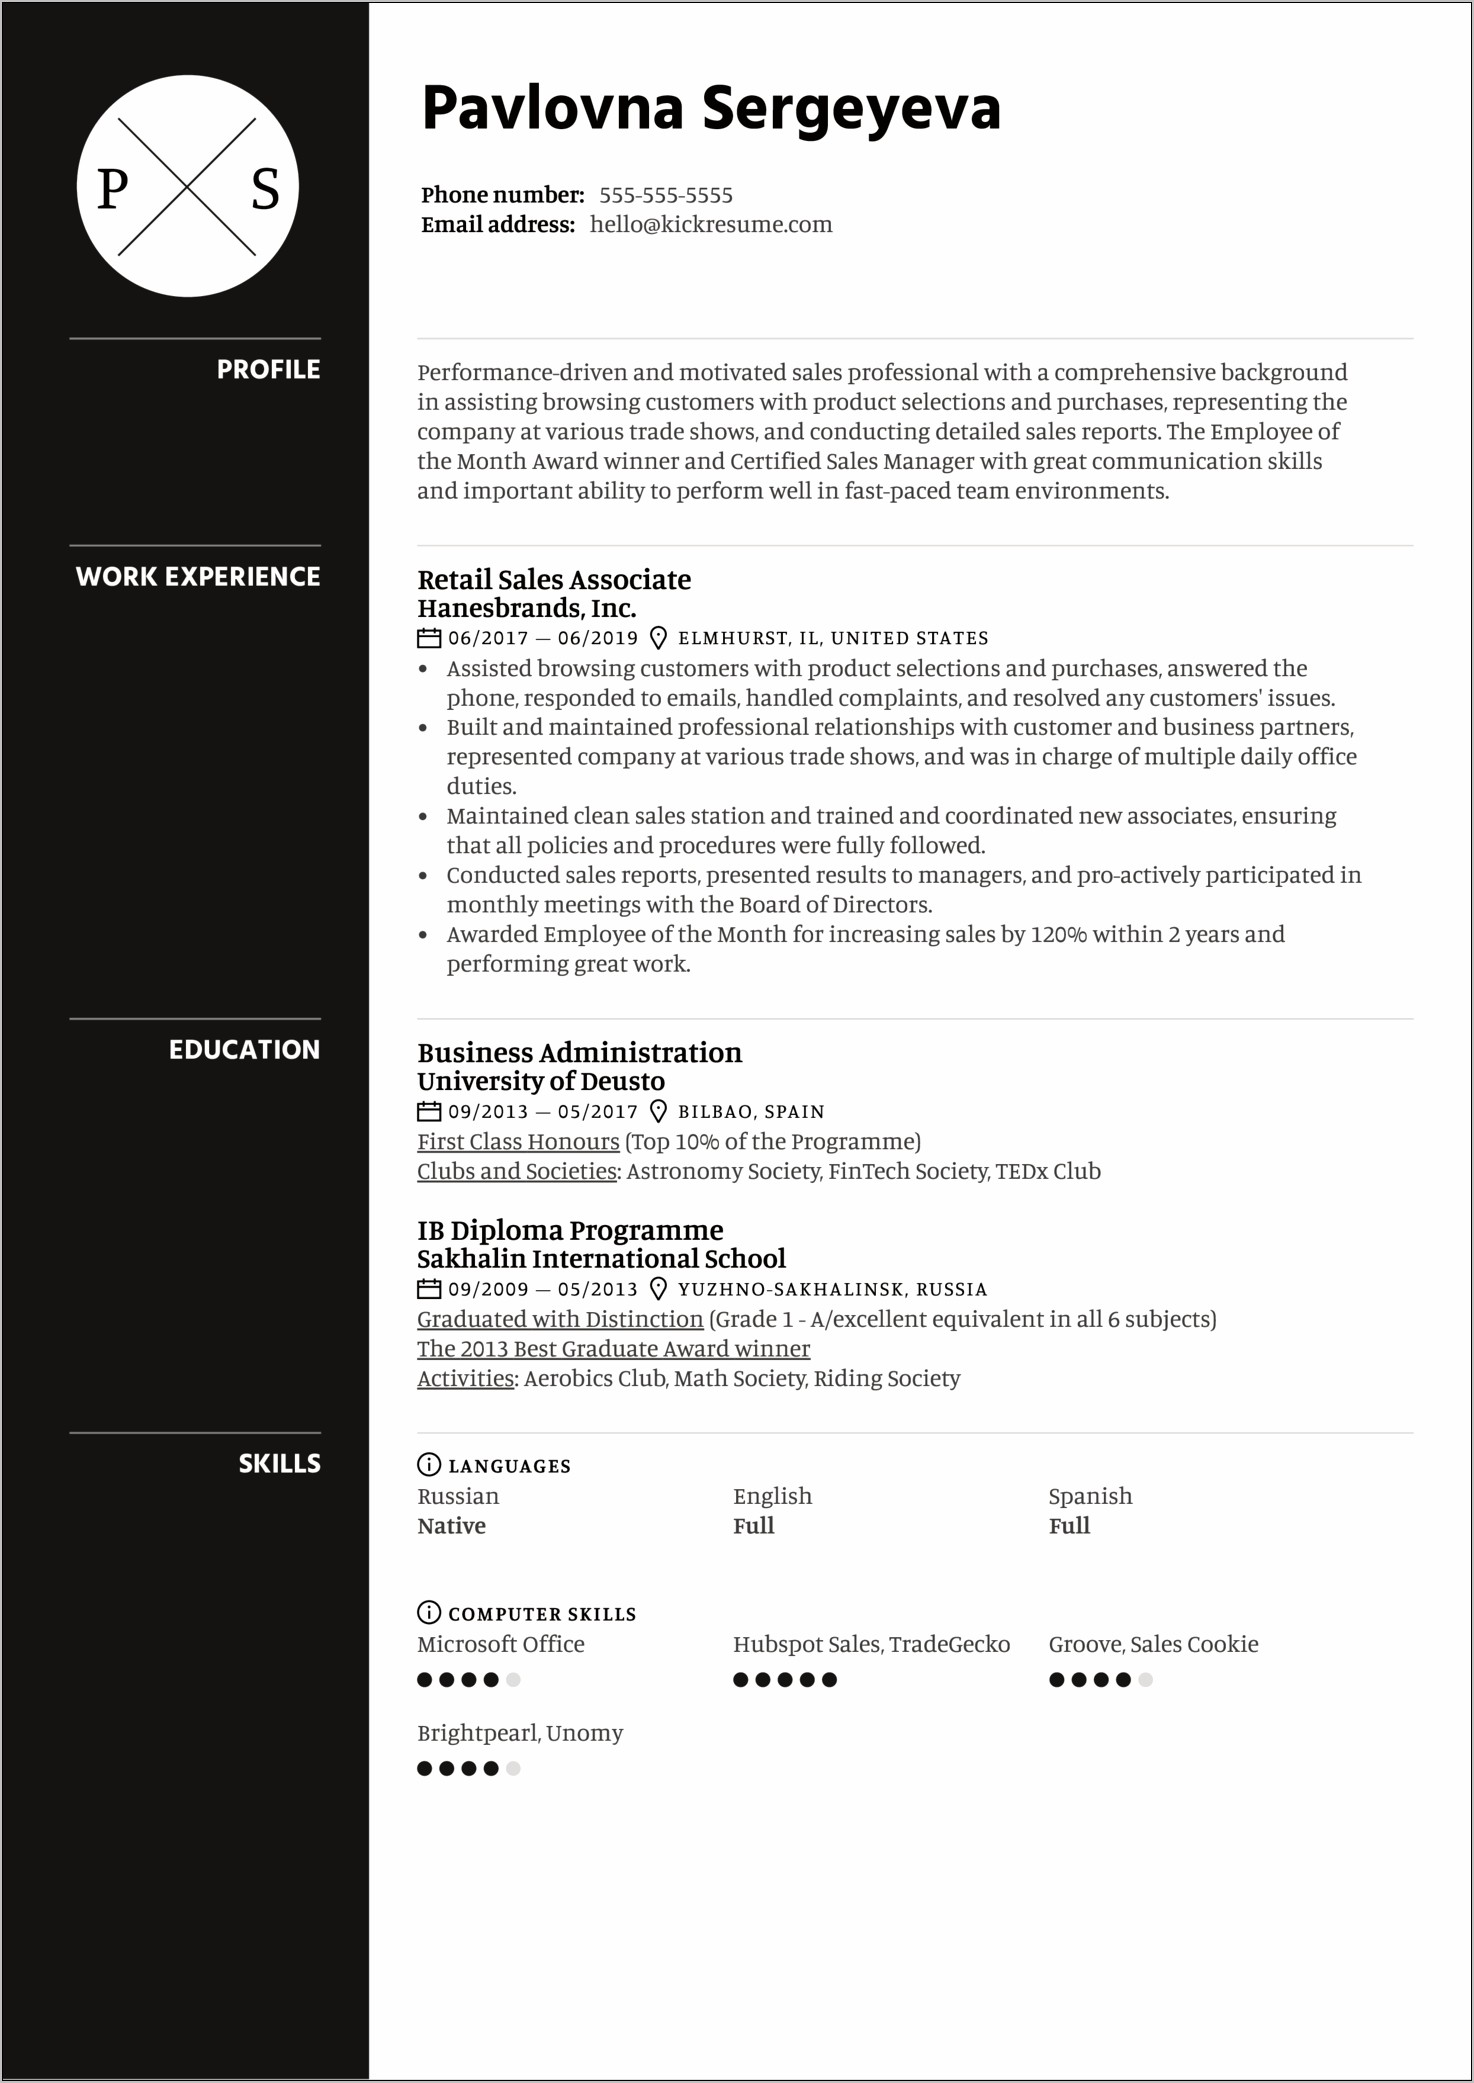 Resume Summary For Retail Sales Associate